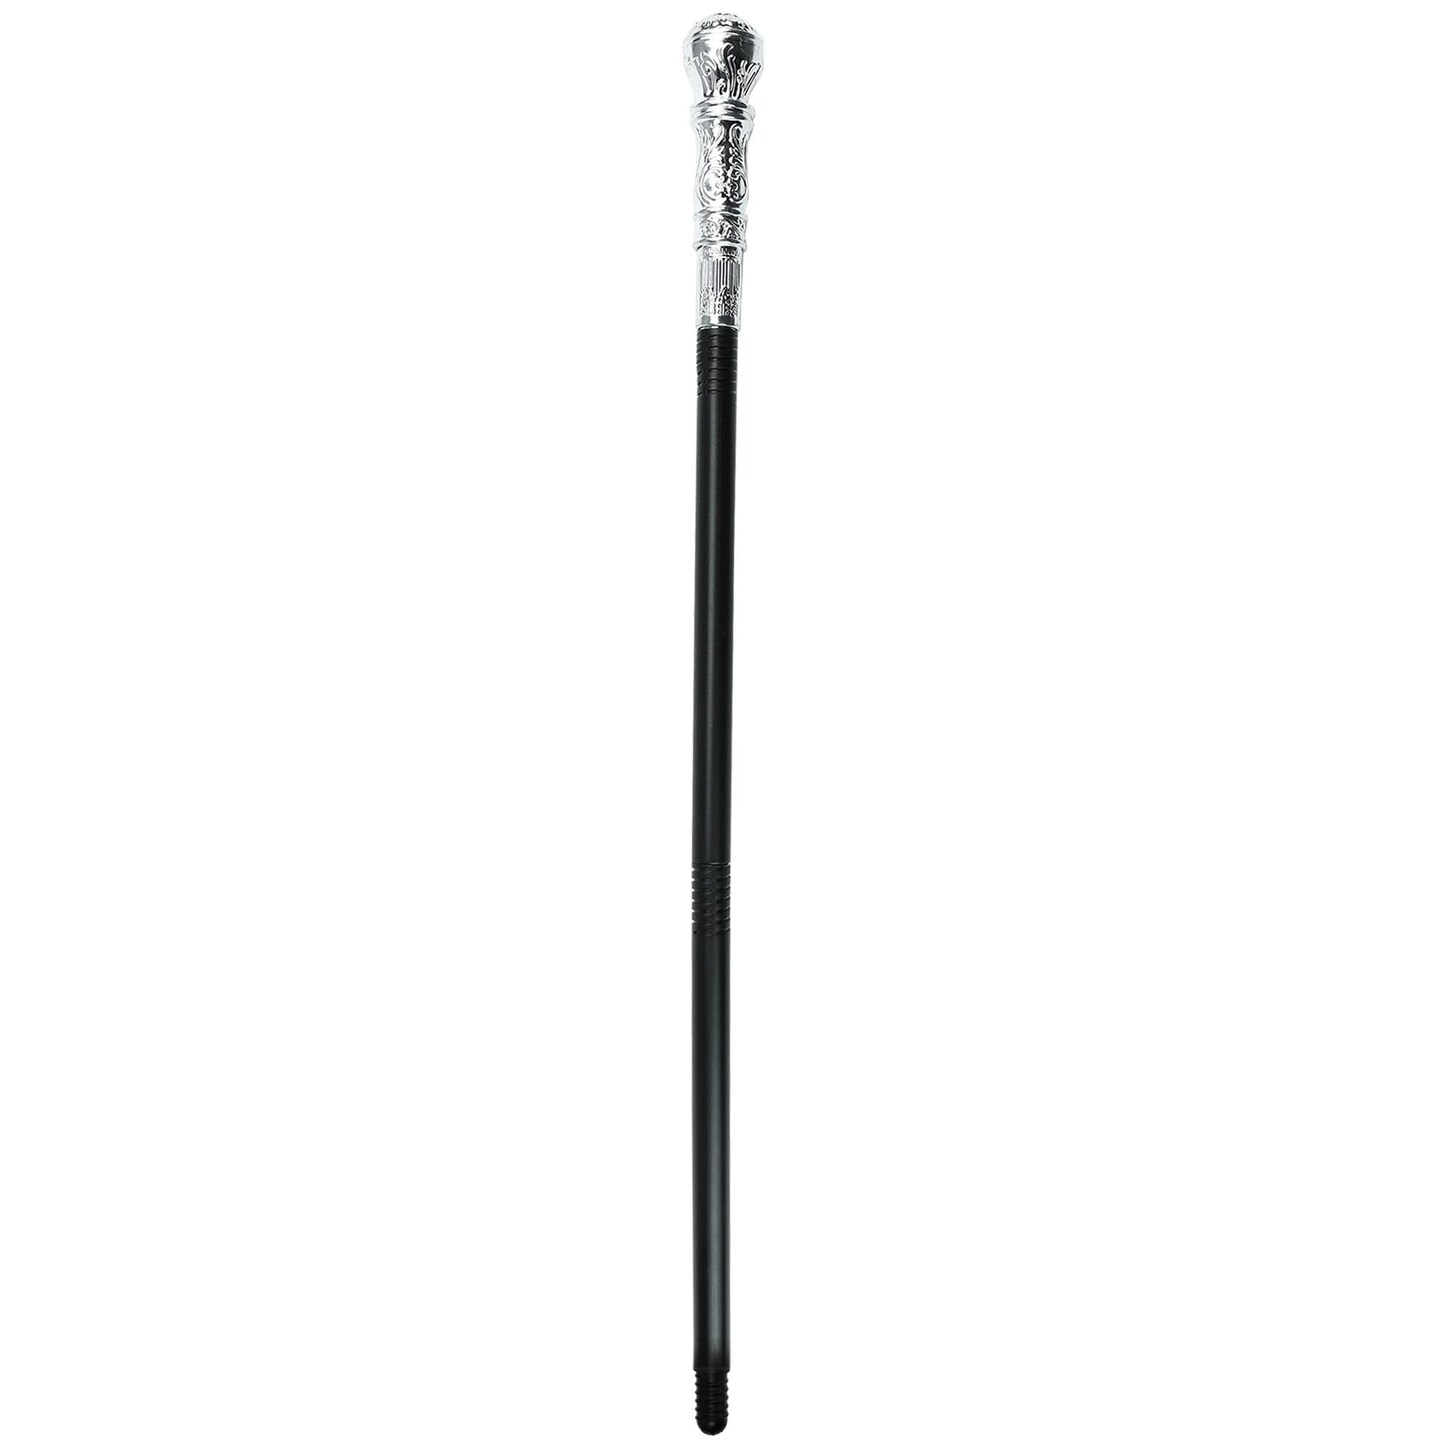 Silver Costume Walking Cane Elegant Prop Stick Dress Canes Costume Accessories for Adults and Kids